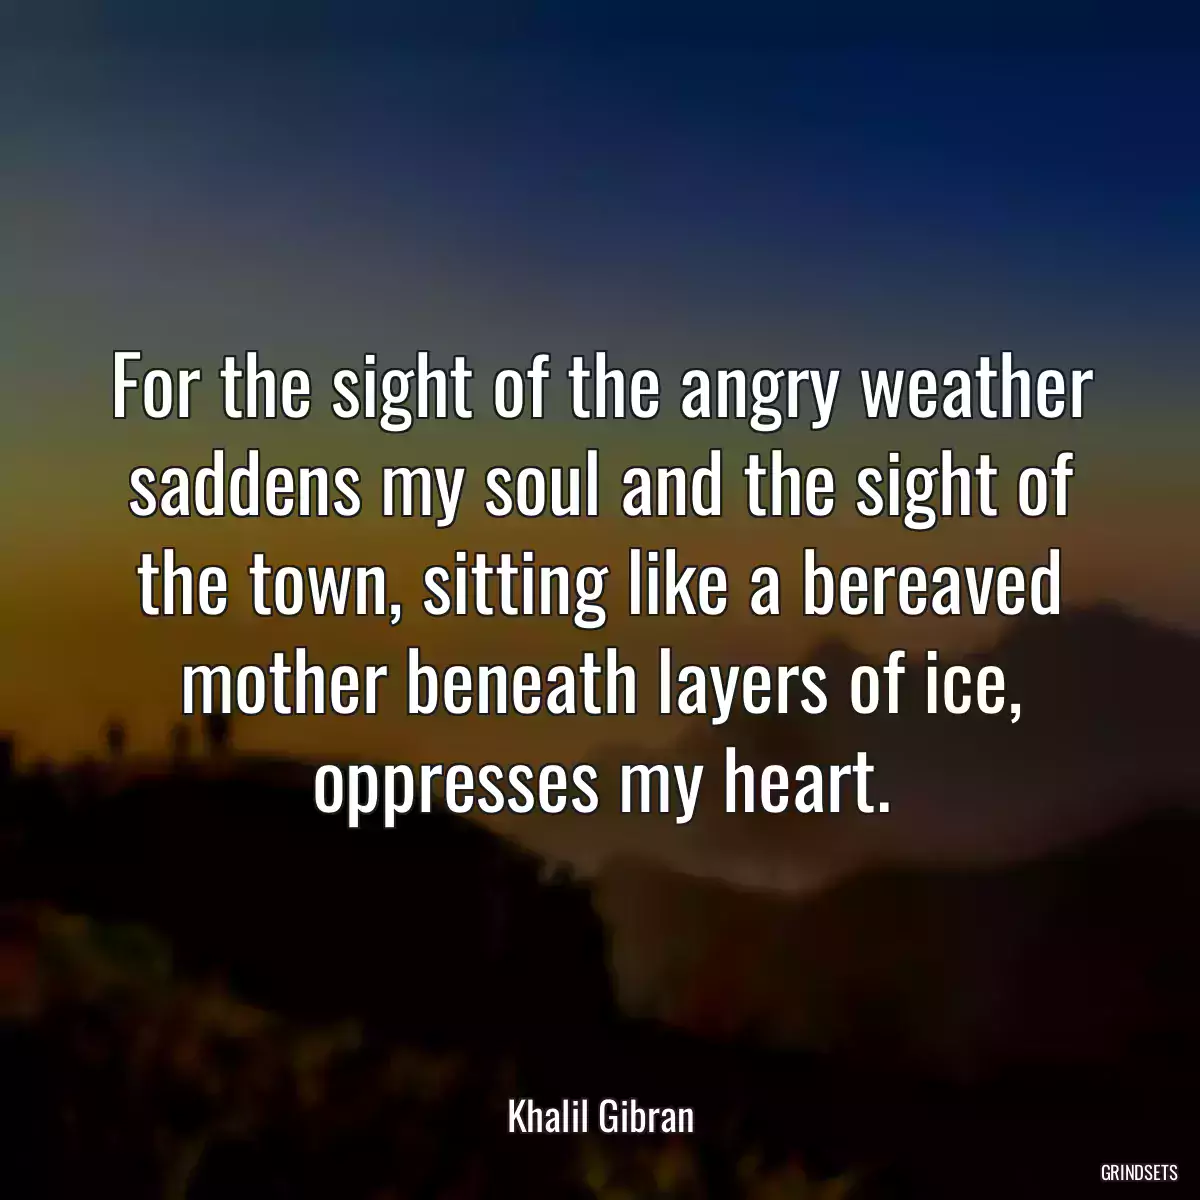 For the sight of the angry weather saddens my soul and the sight of the town, sitting like a bereaved mother beneath layers of ice, oppresses my heart.